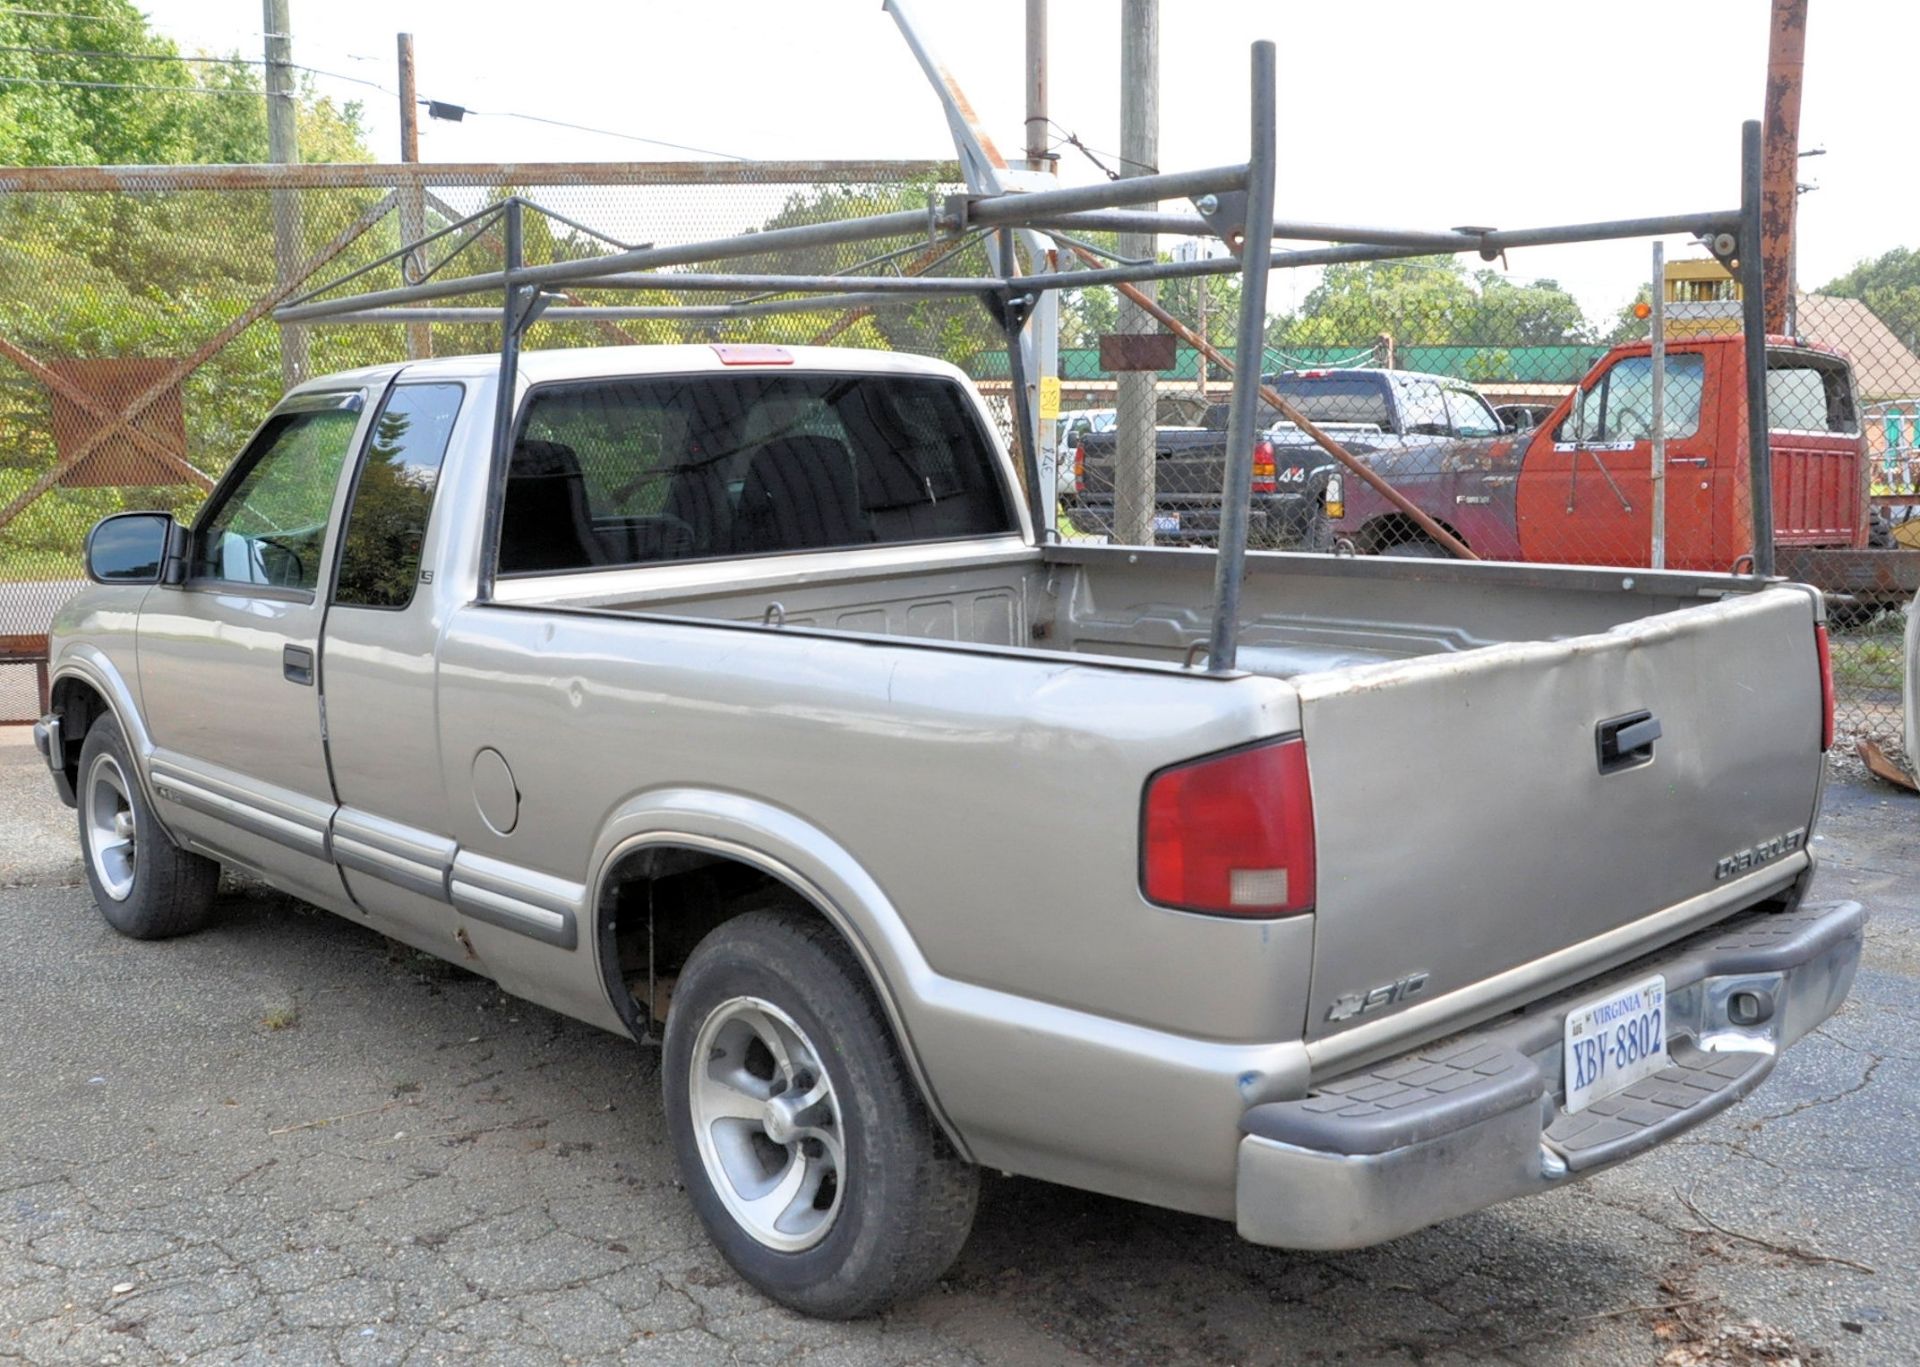 2000 Chevrolet S10 Pickup Truck, VIN 1GCCS1950YK264234, Extended Cab, Short Box, 2300 4-Cylinder Gas - Image 4 of 11